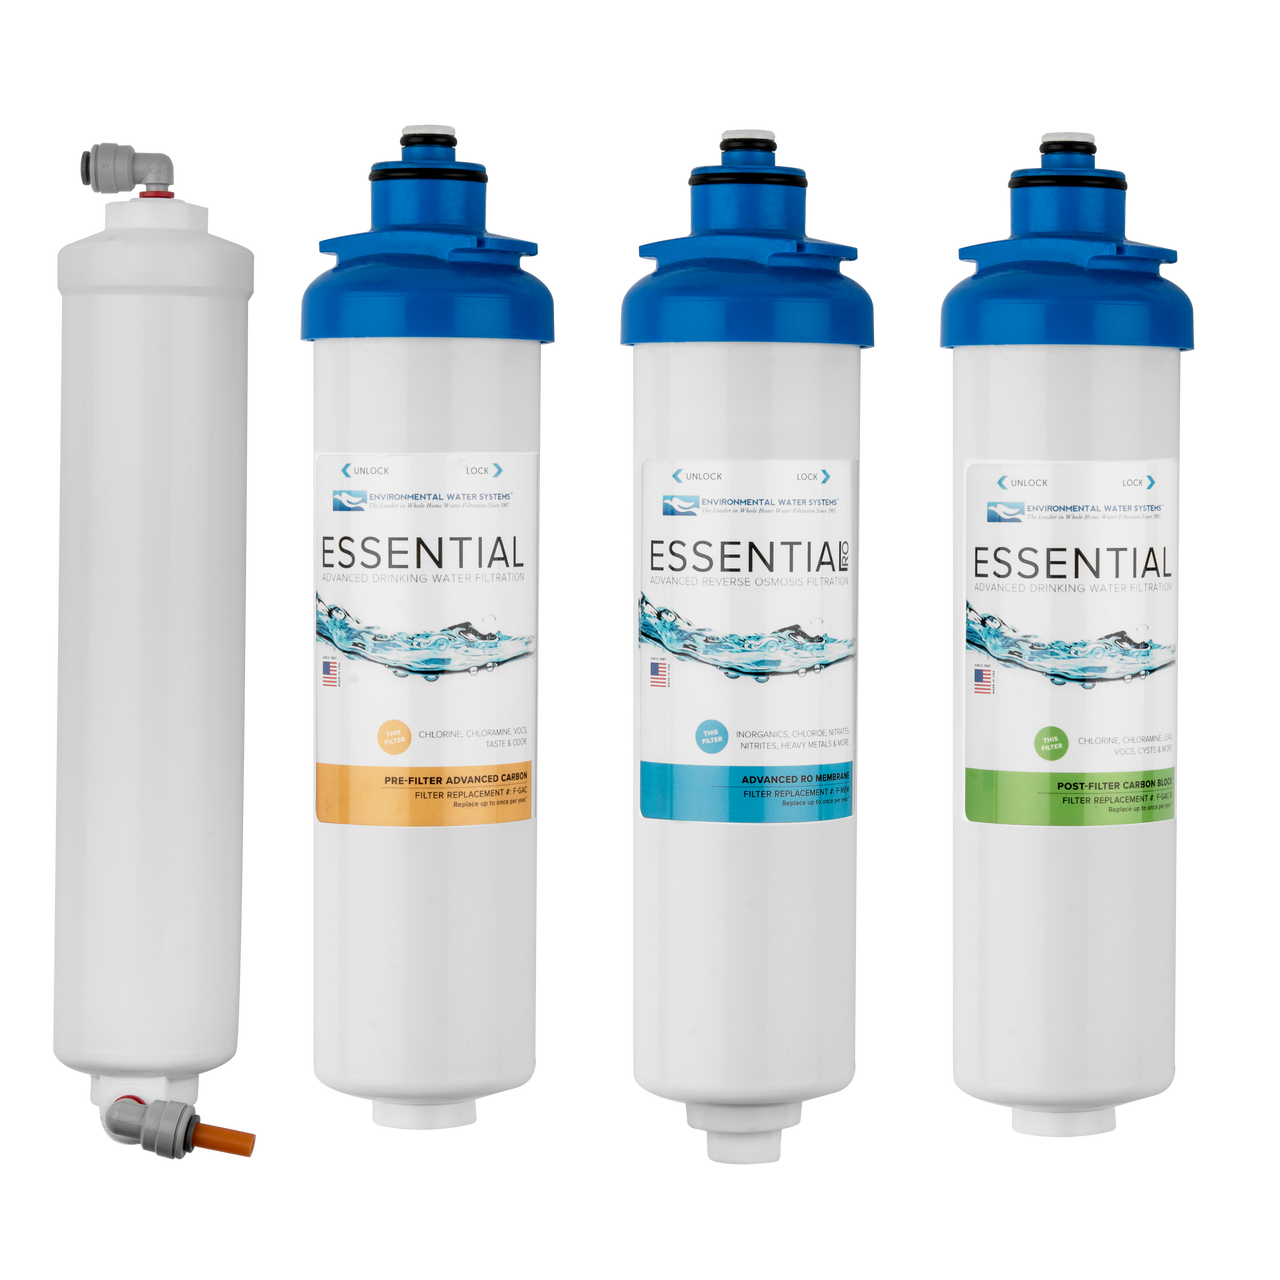 Complete Filter Set for ESSENTIAL 4-Stage Reverse Osmosis System (Filter Set #: F.SET.RO4)